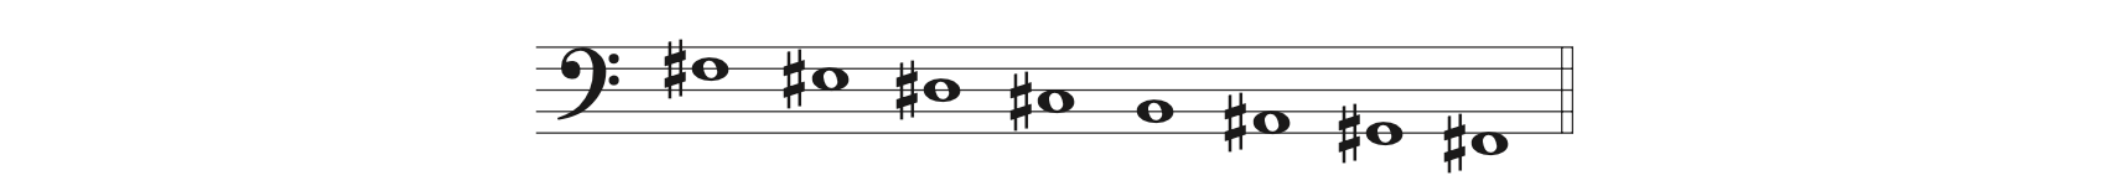 The given pitches descend in the bass clef, beginning on F-sharp3. The pitches are F-sharp, E-sharp, D-sharp, C-sharp, B, A-sharp, G-sharp, and F-sharp.